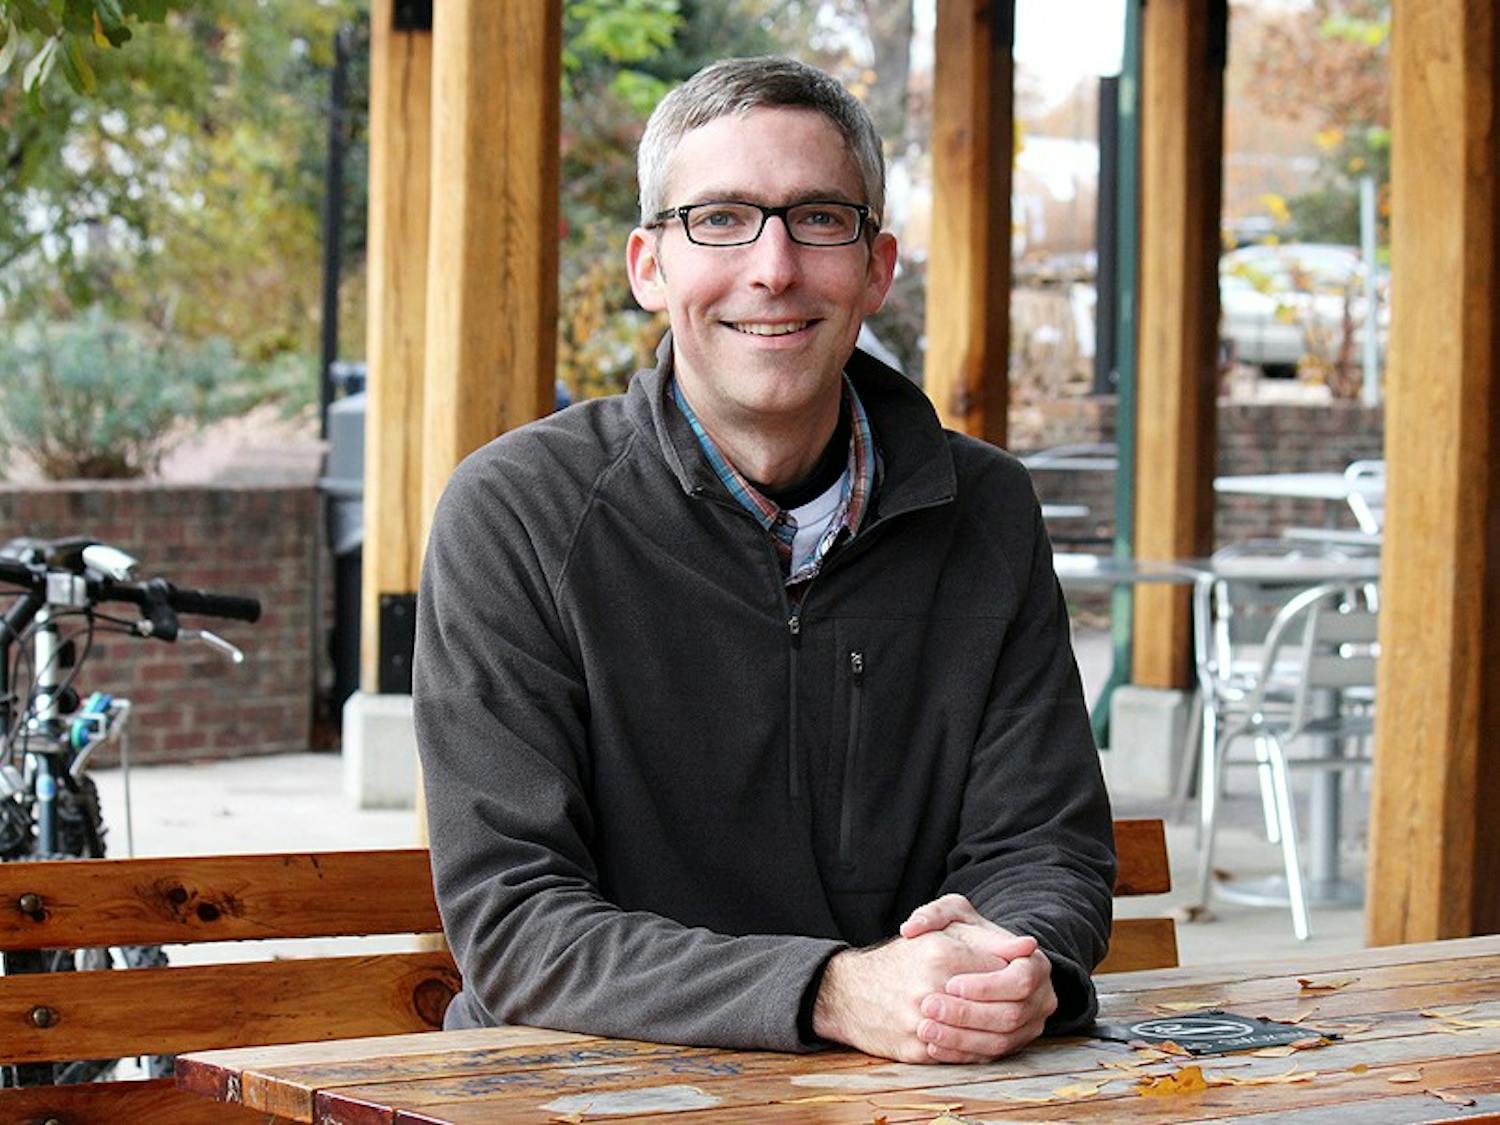 Damon Seils, a member of the Carrboro Planning Department, declared that he will be running for a seat on the Carrboro Board of Aldermen in 2012.